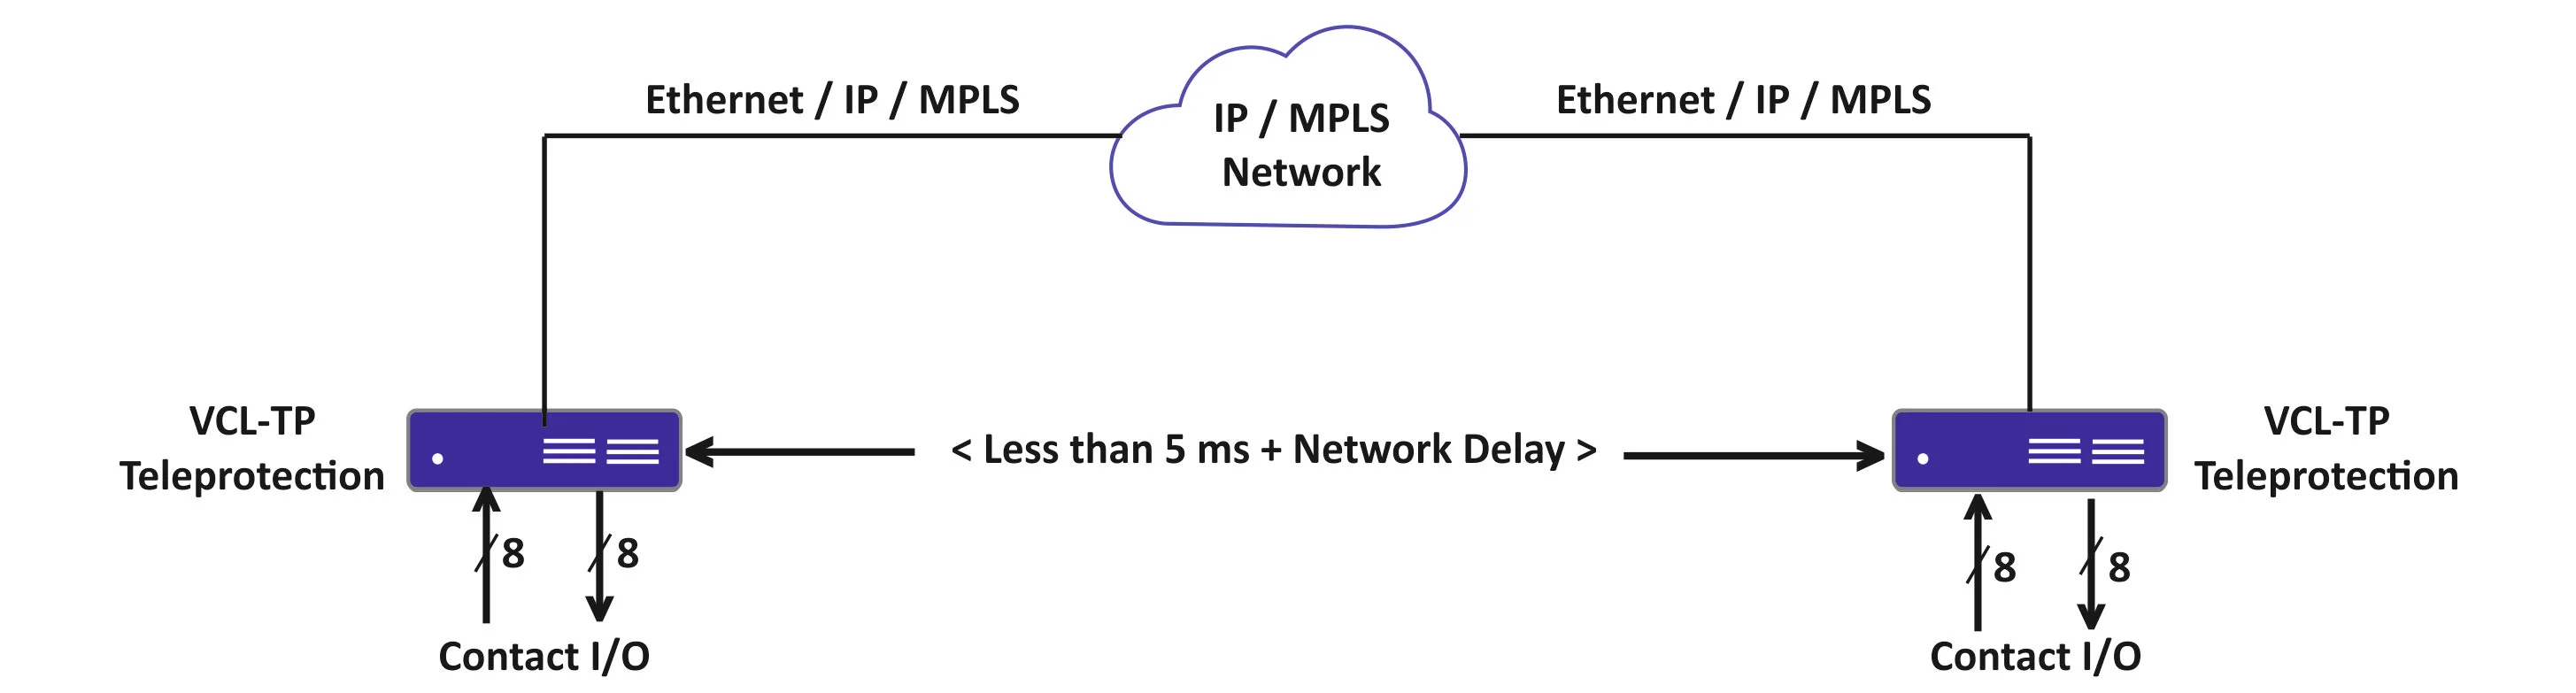 Teleprotection over IP / MPLS Network